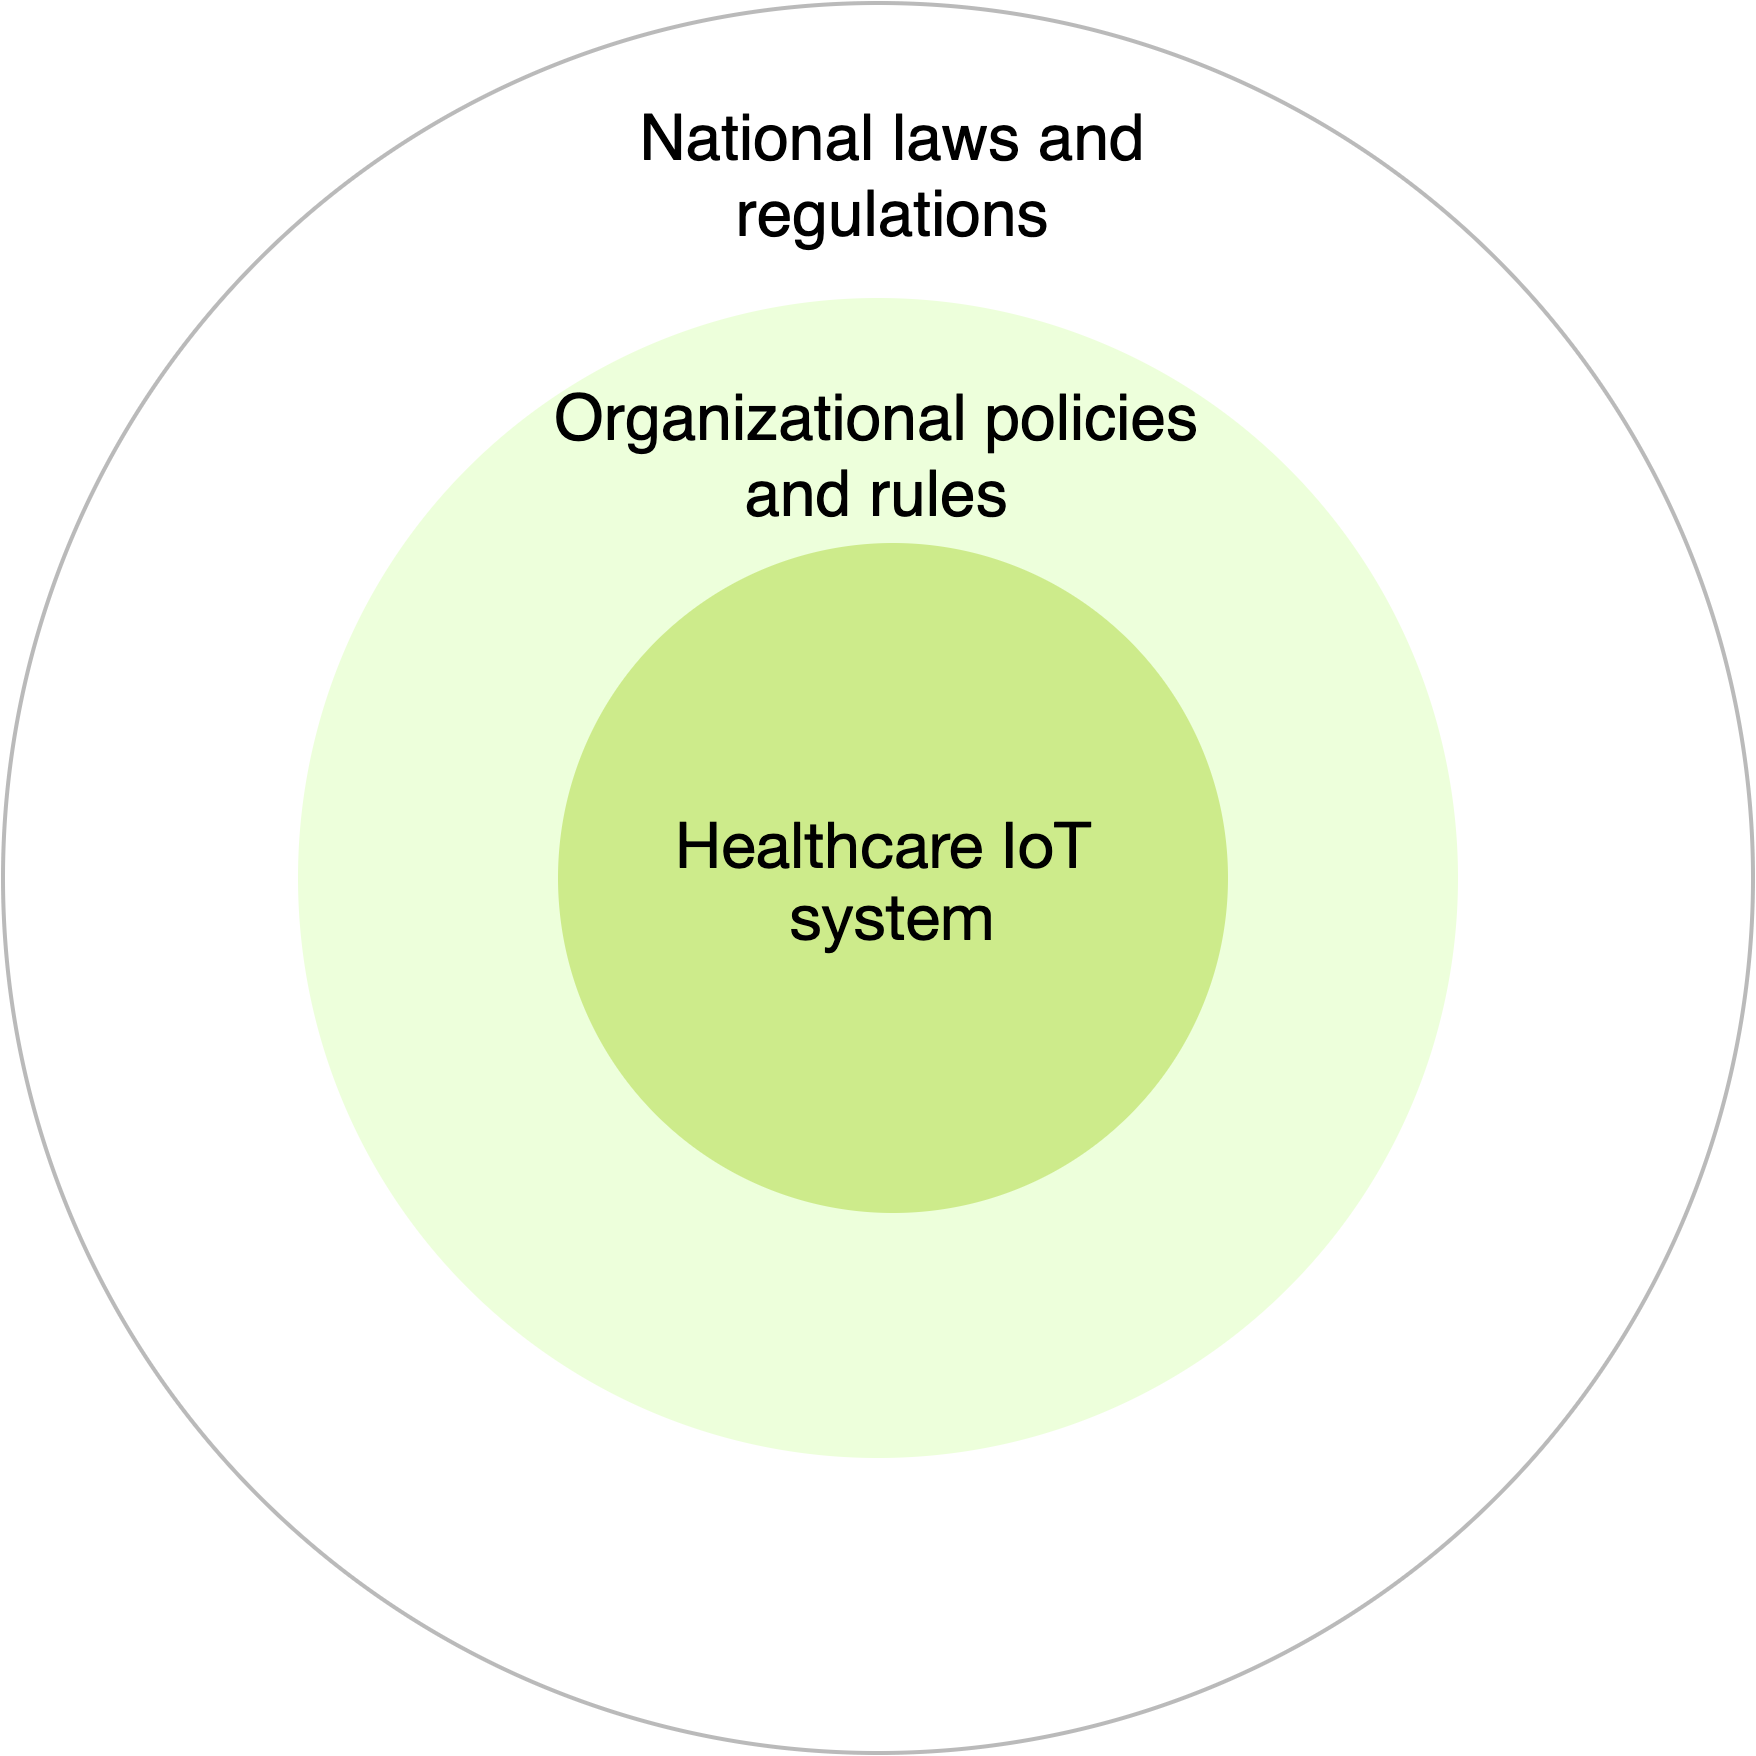  A multi-layered structure for determining the sources of requirements for healthcare IoT systems